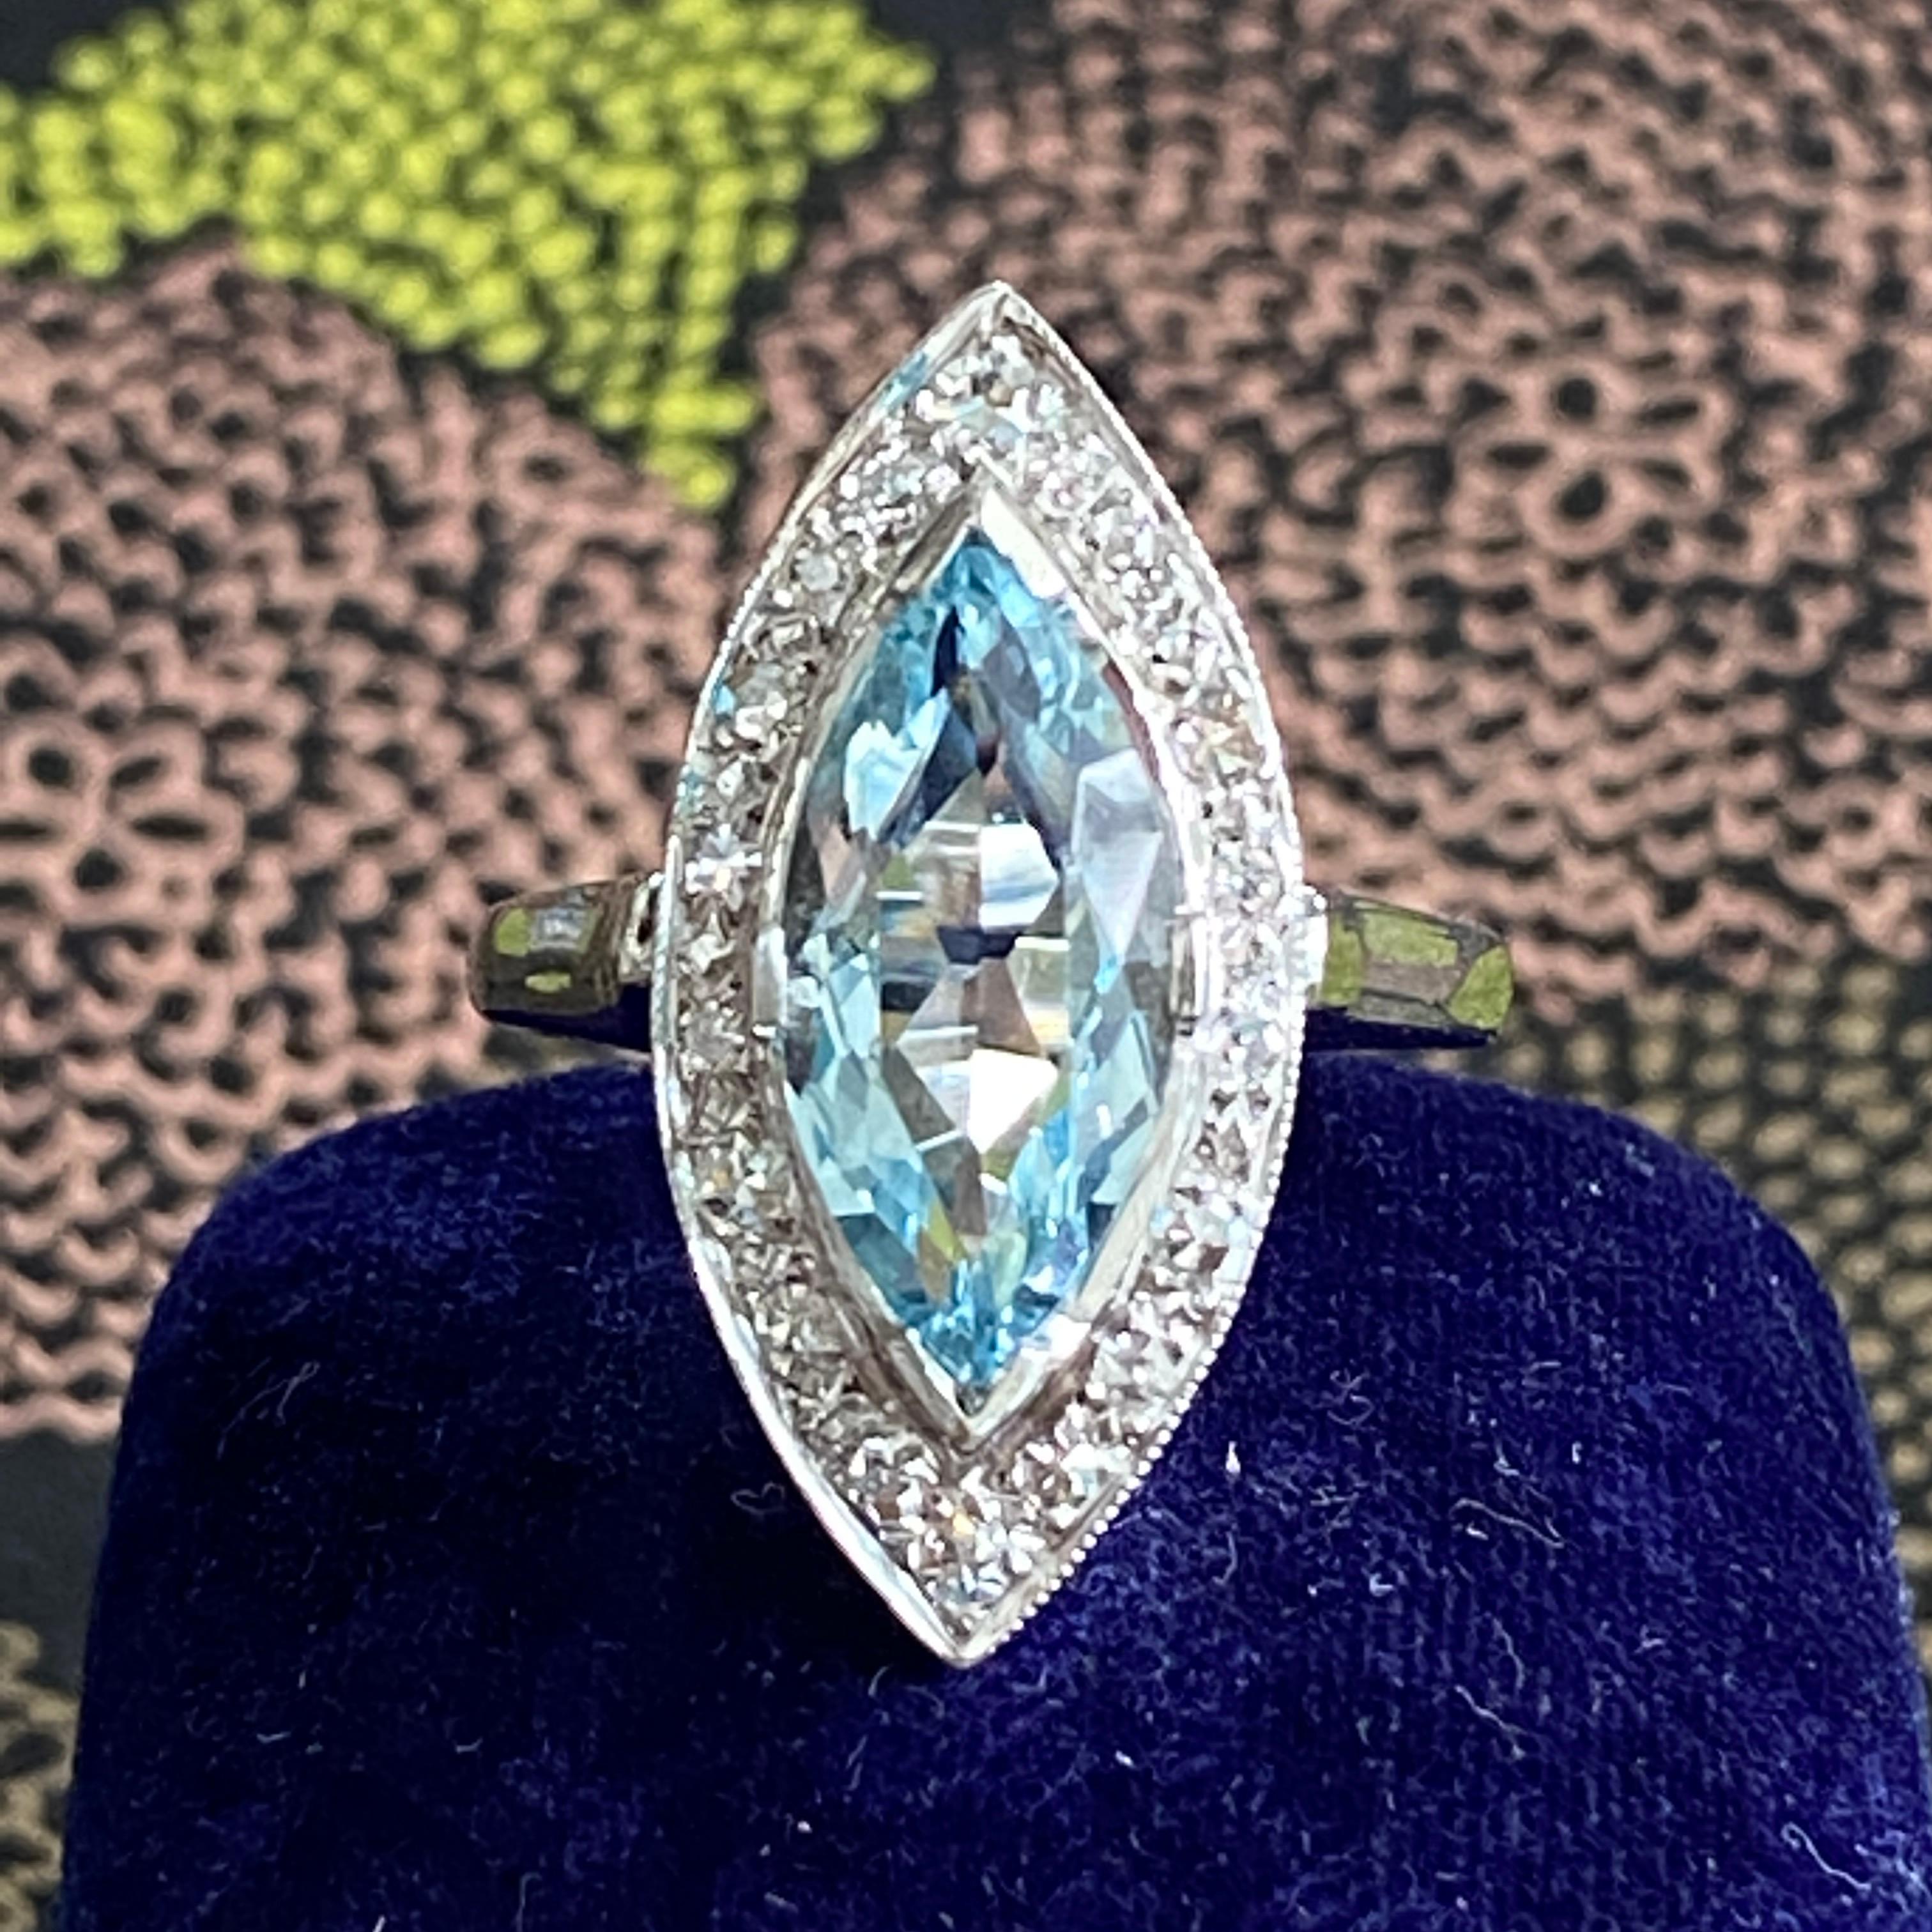 Details:
Classic Vintage marquise aquamarine and diamond ring! The marquise cut aquamarine measure 15.6mm x 7.6mm (approx 2.5 carats); and the 19 diamonds measure 1.75 to 2.25mm. The aquamarine has a light, classic beautiful blue color. The front of